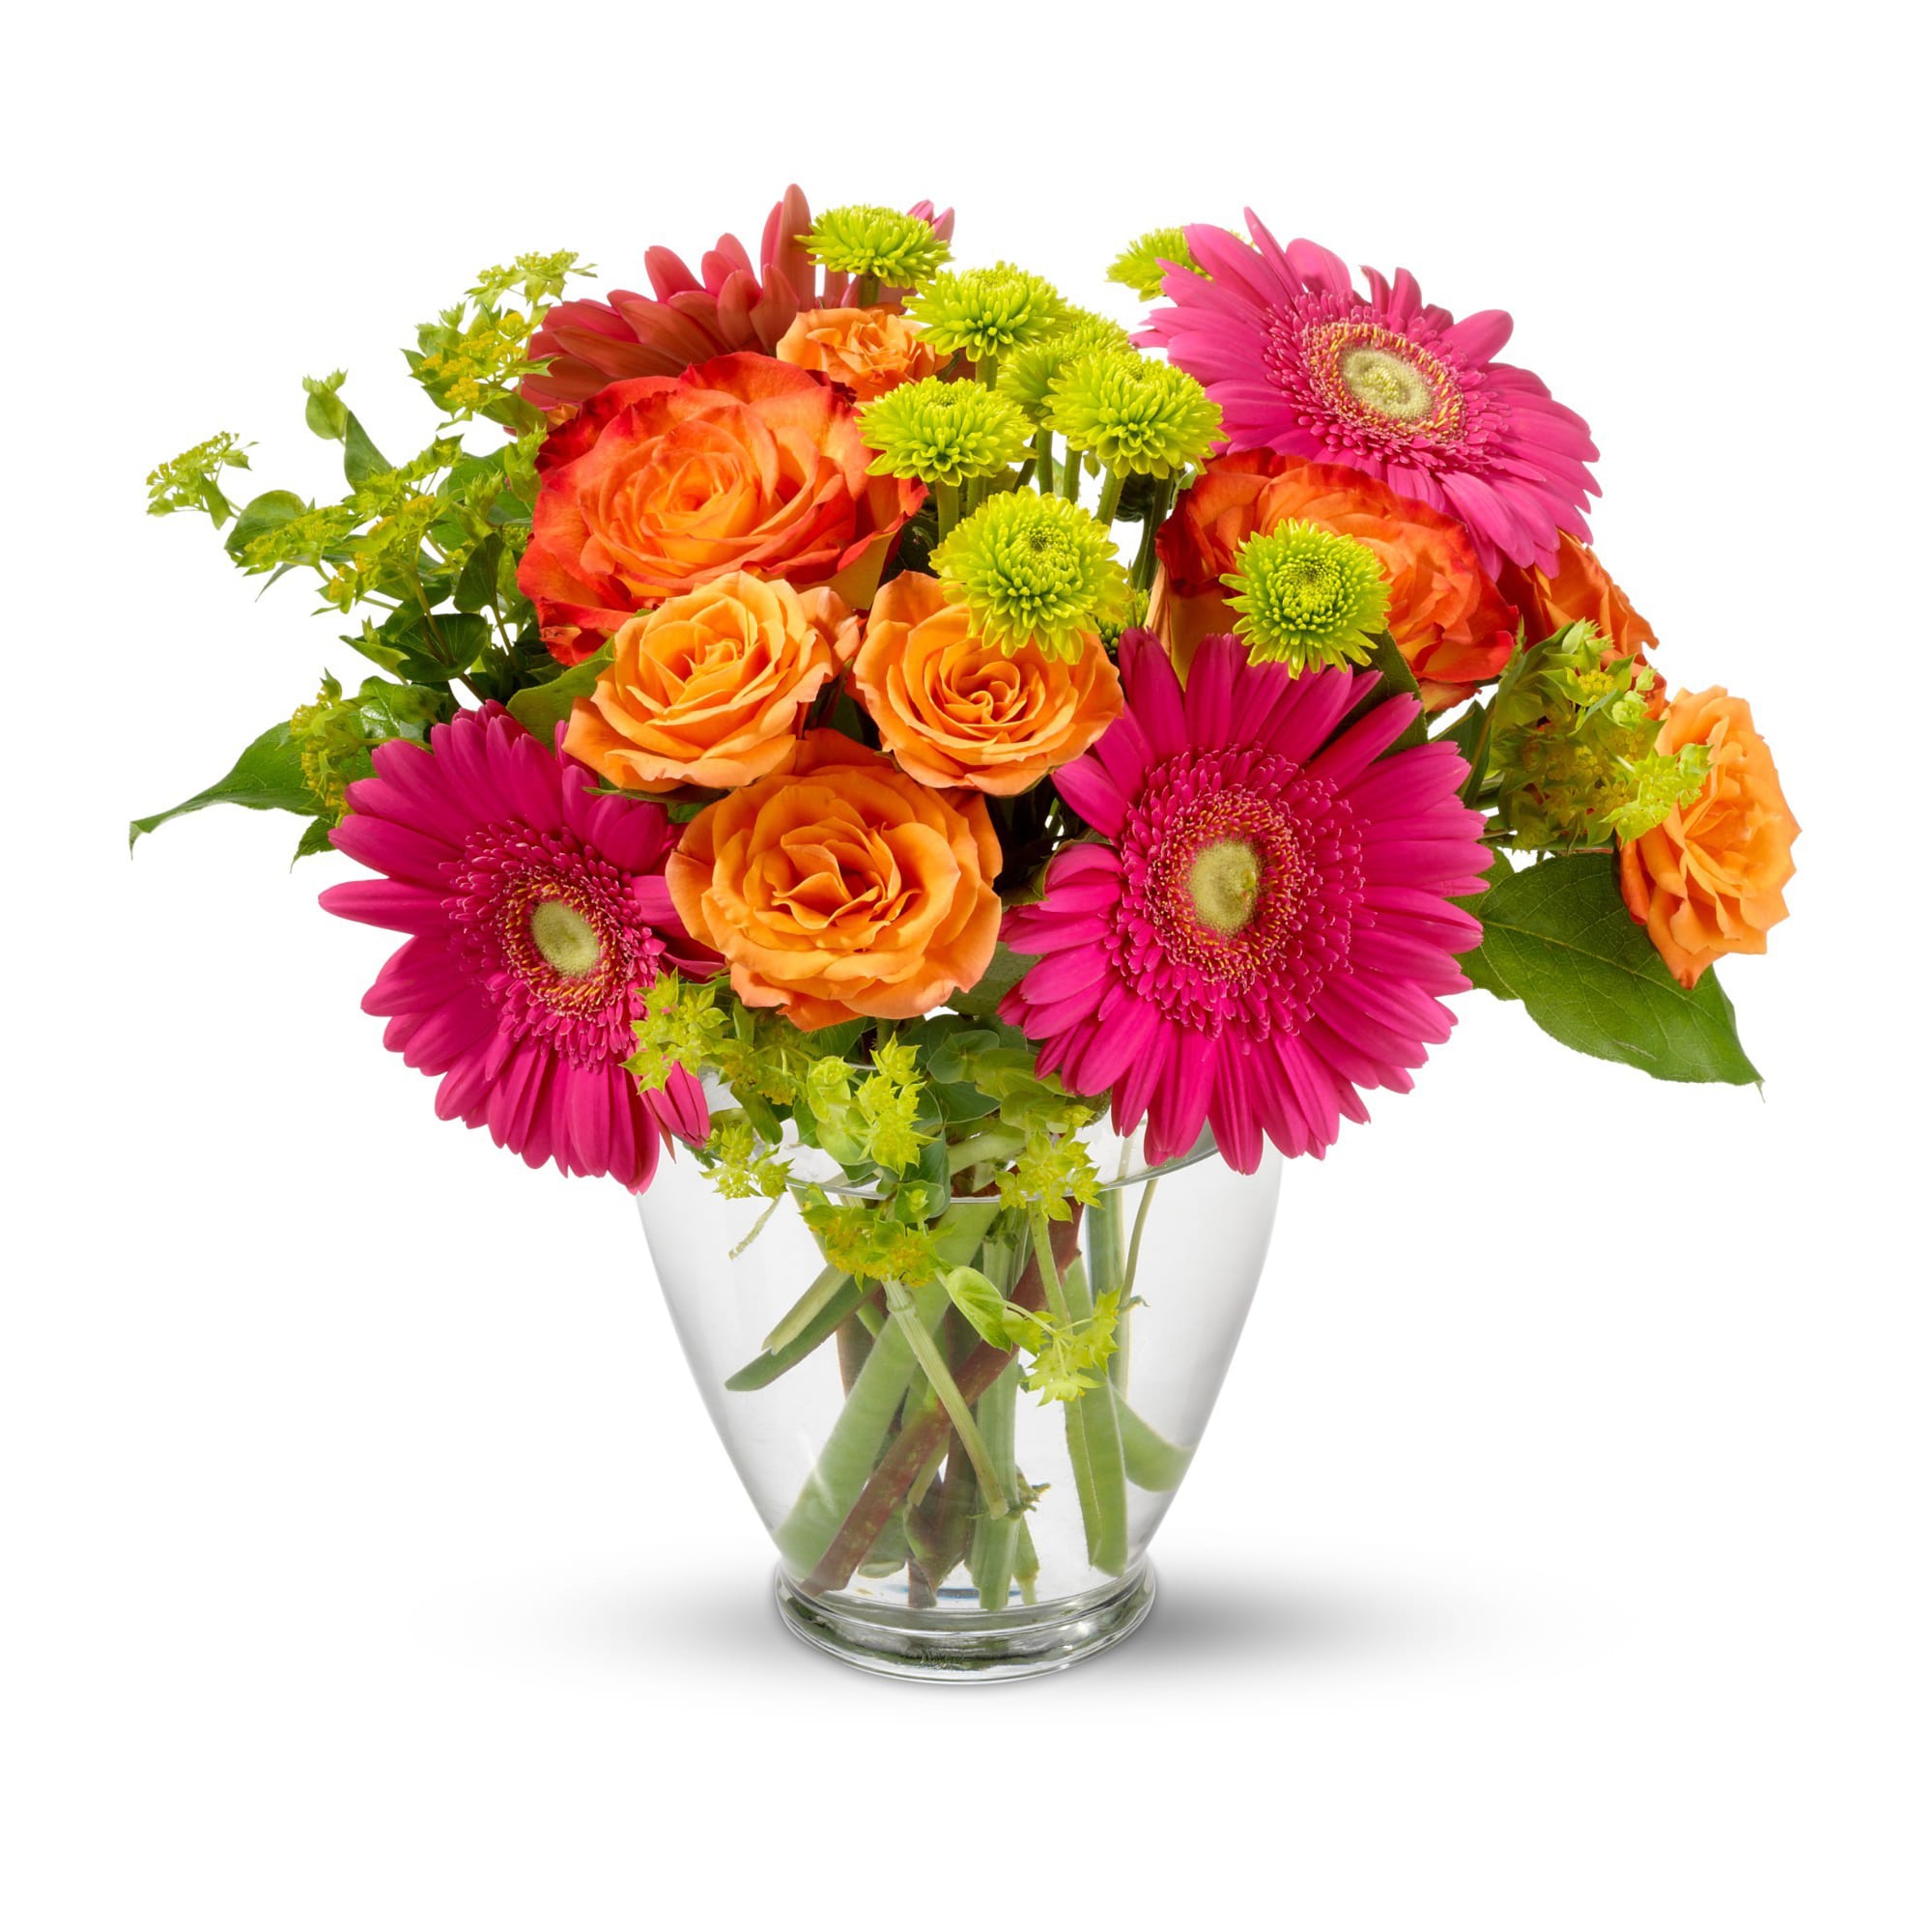 End of the Rainbow by Teleflora - Hot fun in the summertime is here, and it's flowerific to be sure! This beautiful bouquet brings together a rainbow of the season's brightest blossoms.